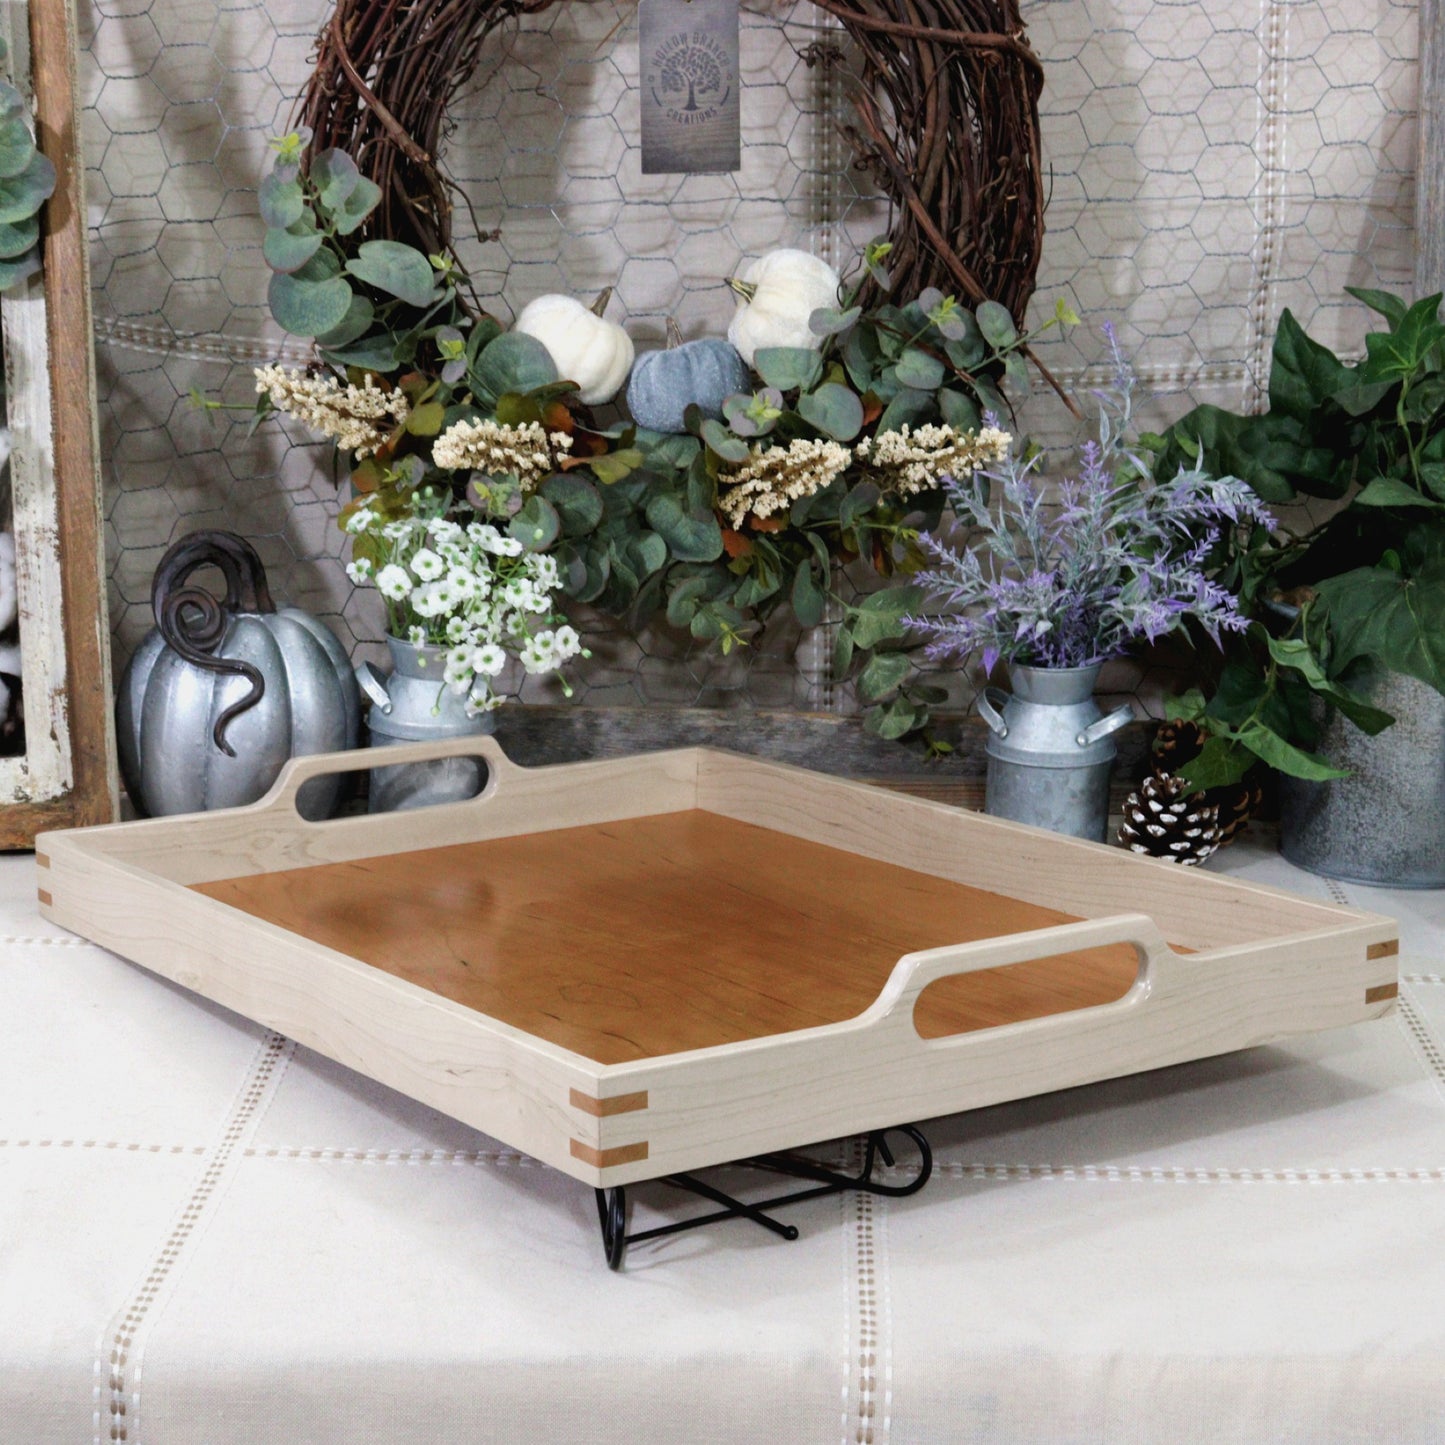 Maple Wooden Serving Ottoman Tray with Handles and Cherry Inlaid Corners - Handmade in the USA